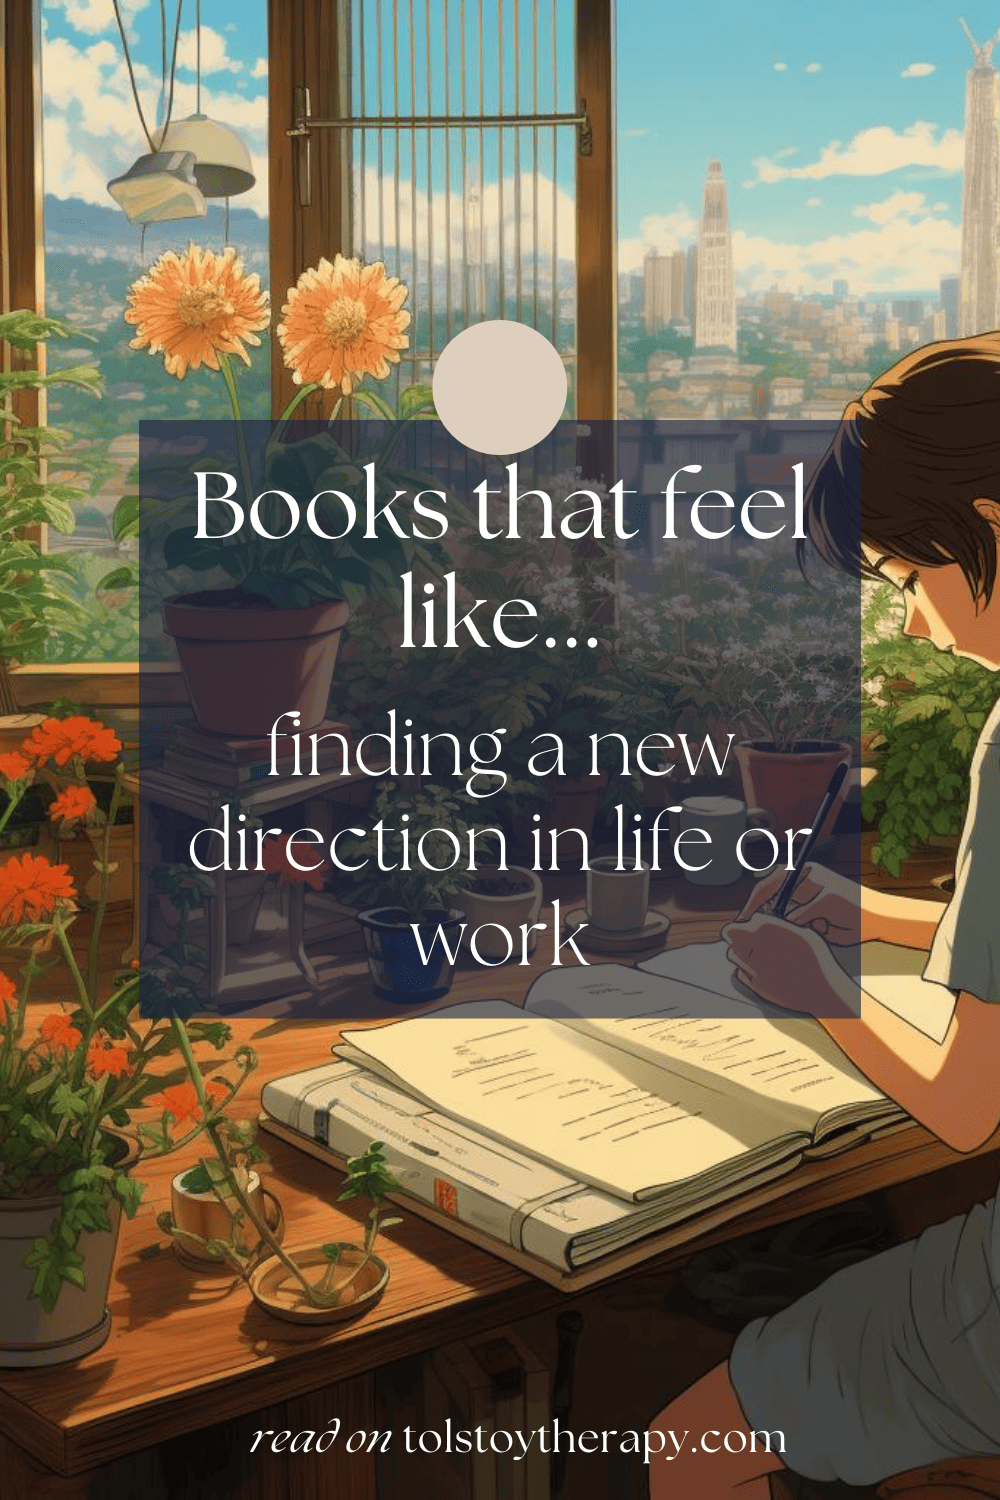 books that feel like finding a new direction in life or work